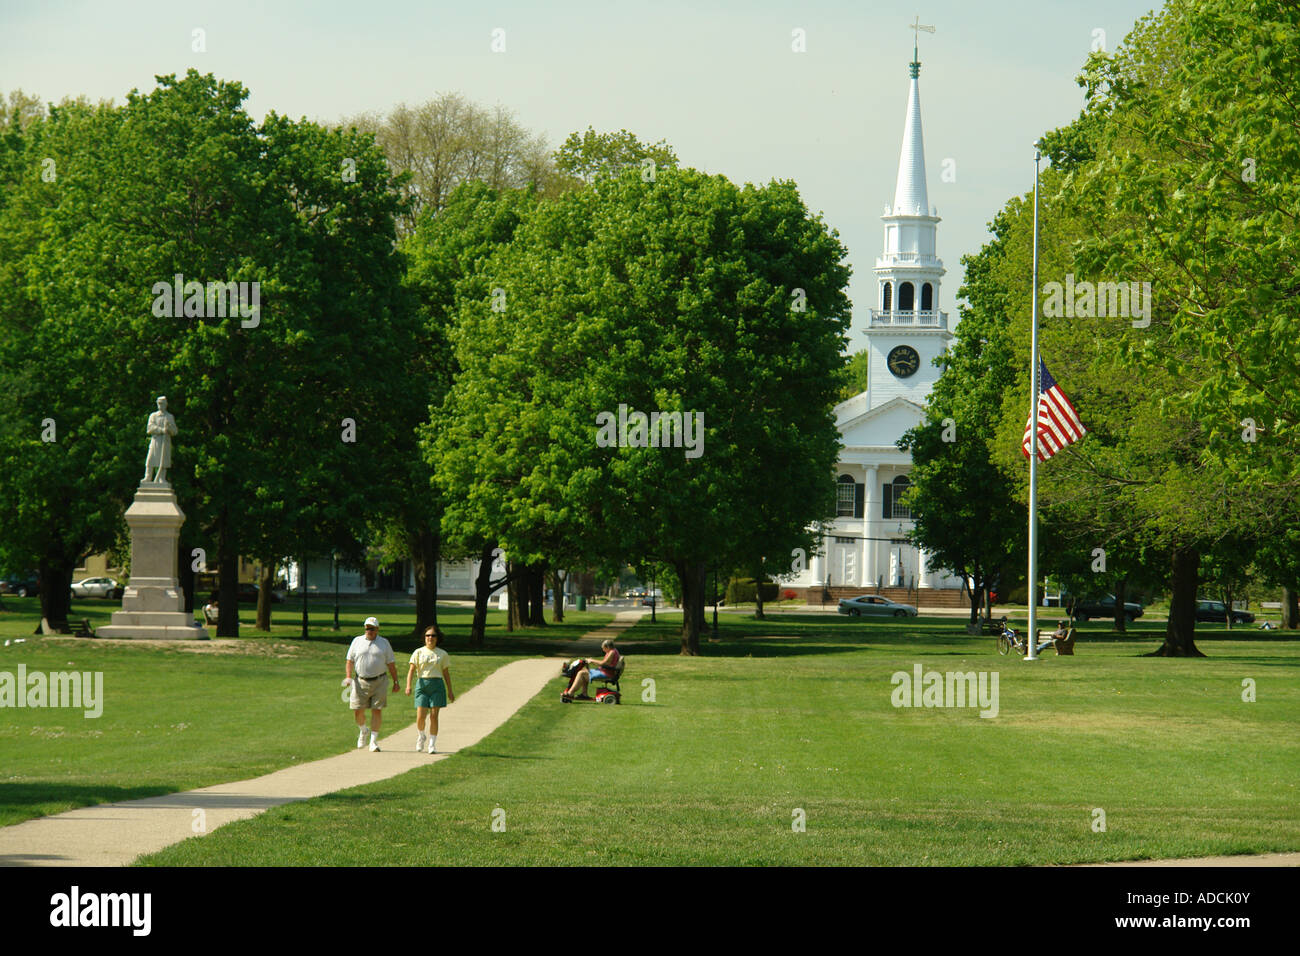 Ajd58438 Guilford Ct Connecticut Downtown The Green And First Congregational Church Stock Photo - Alamy